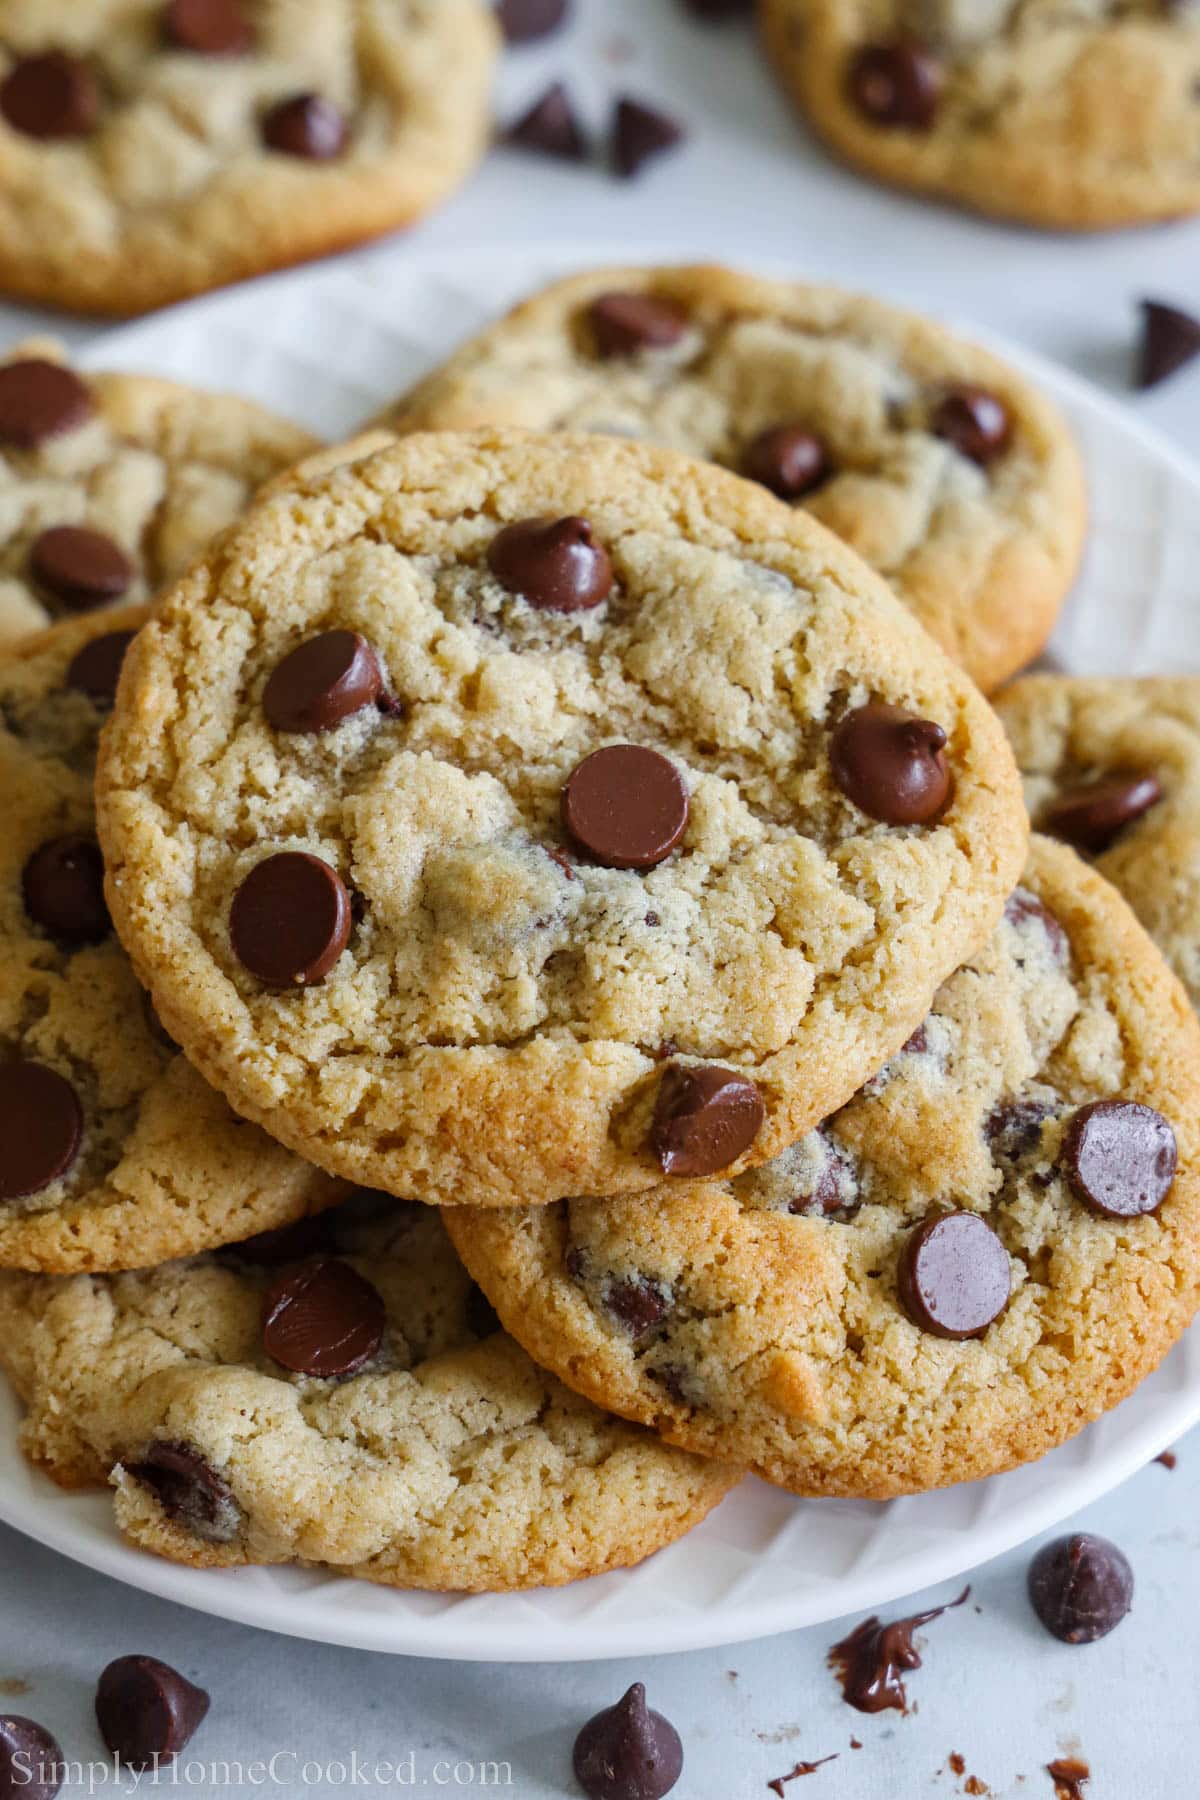 Pile of Almond Flour Chocolate Chip Cookies